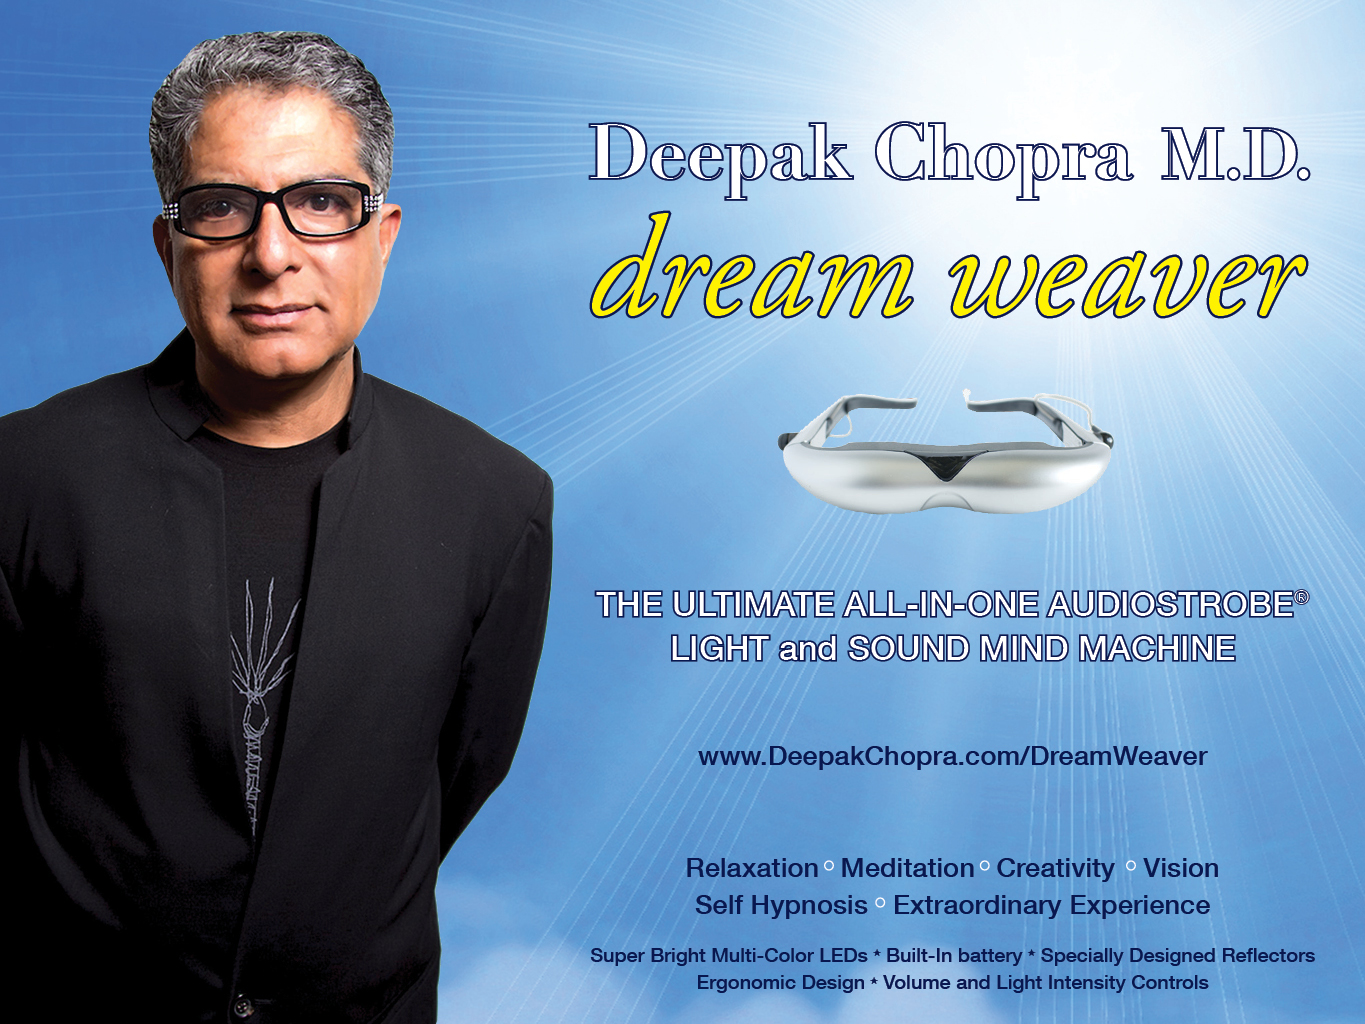 Deepak Chopra, M.D. Introduces the Dream Weaver App for iPhones and Androids to Meditate, Relax and Dream Instantly Image